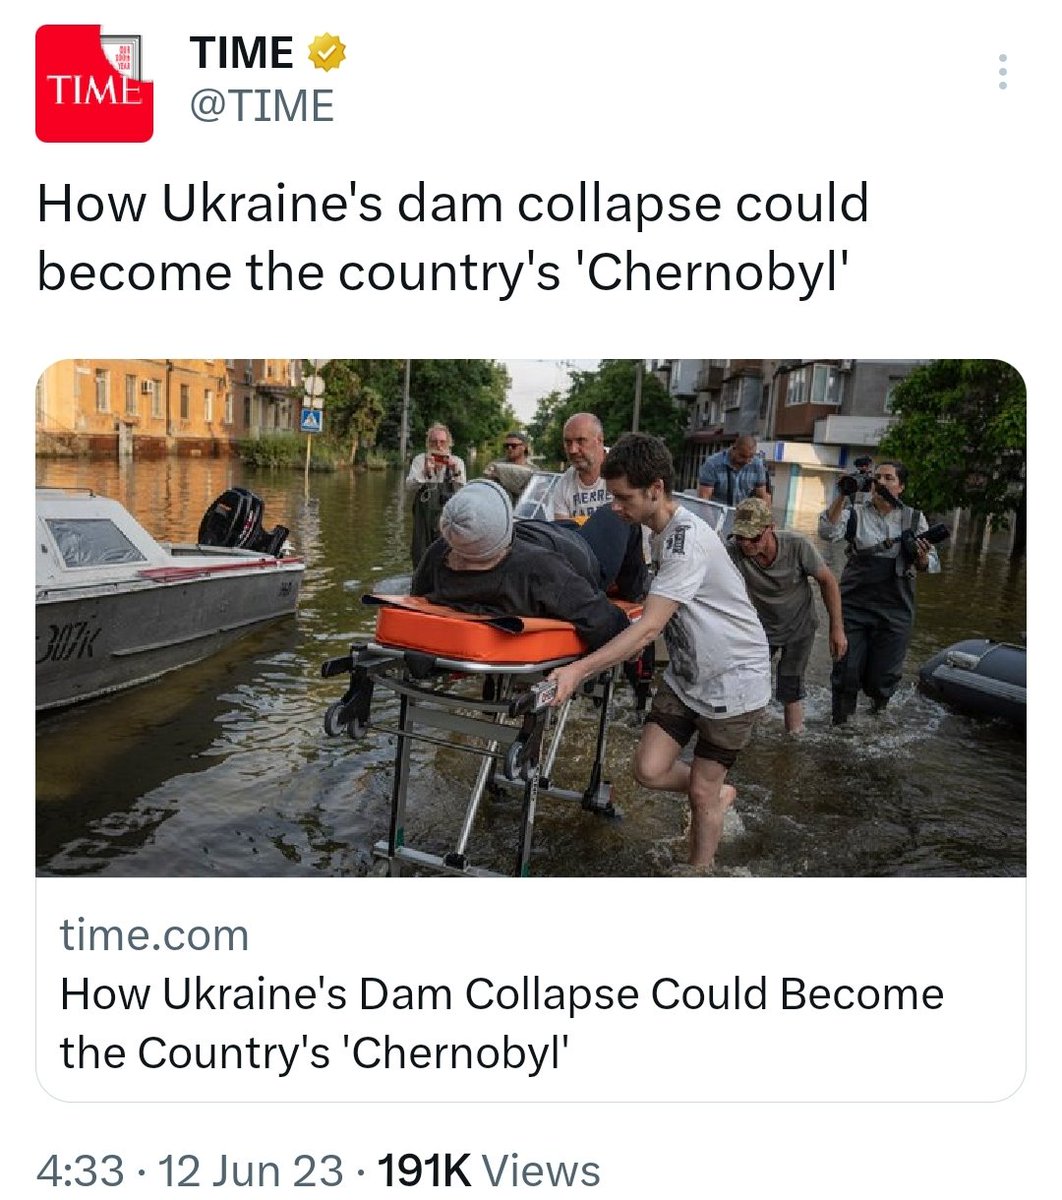 The people writing this headline will be more than surprised when they find out where Chernobyl is.